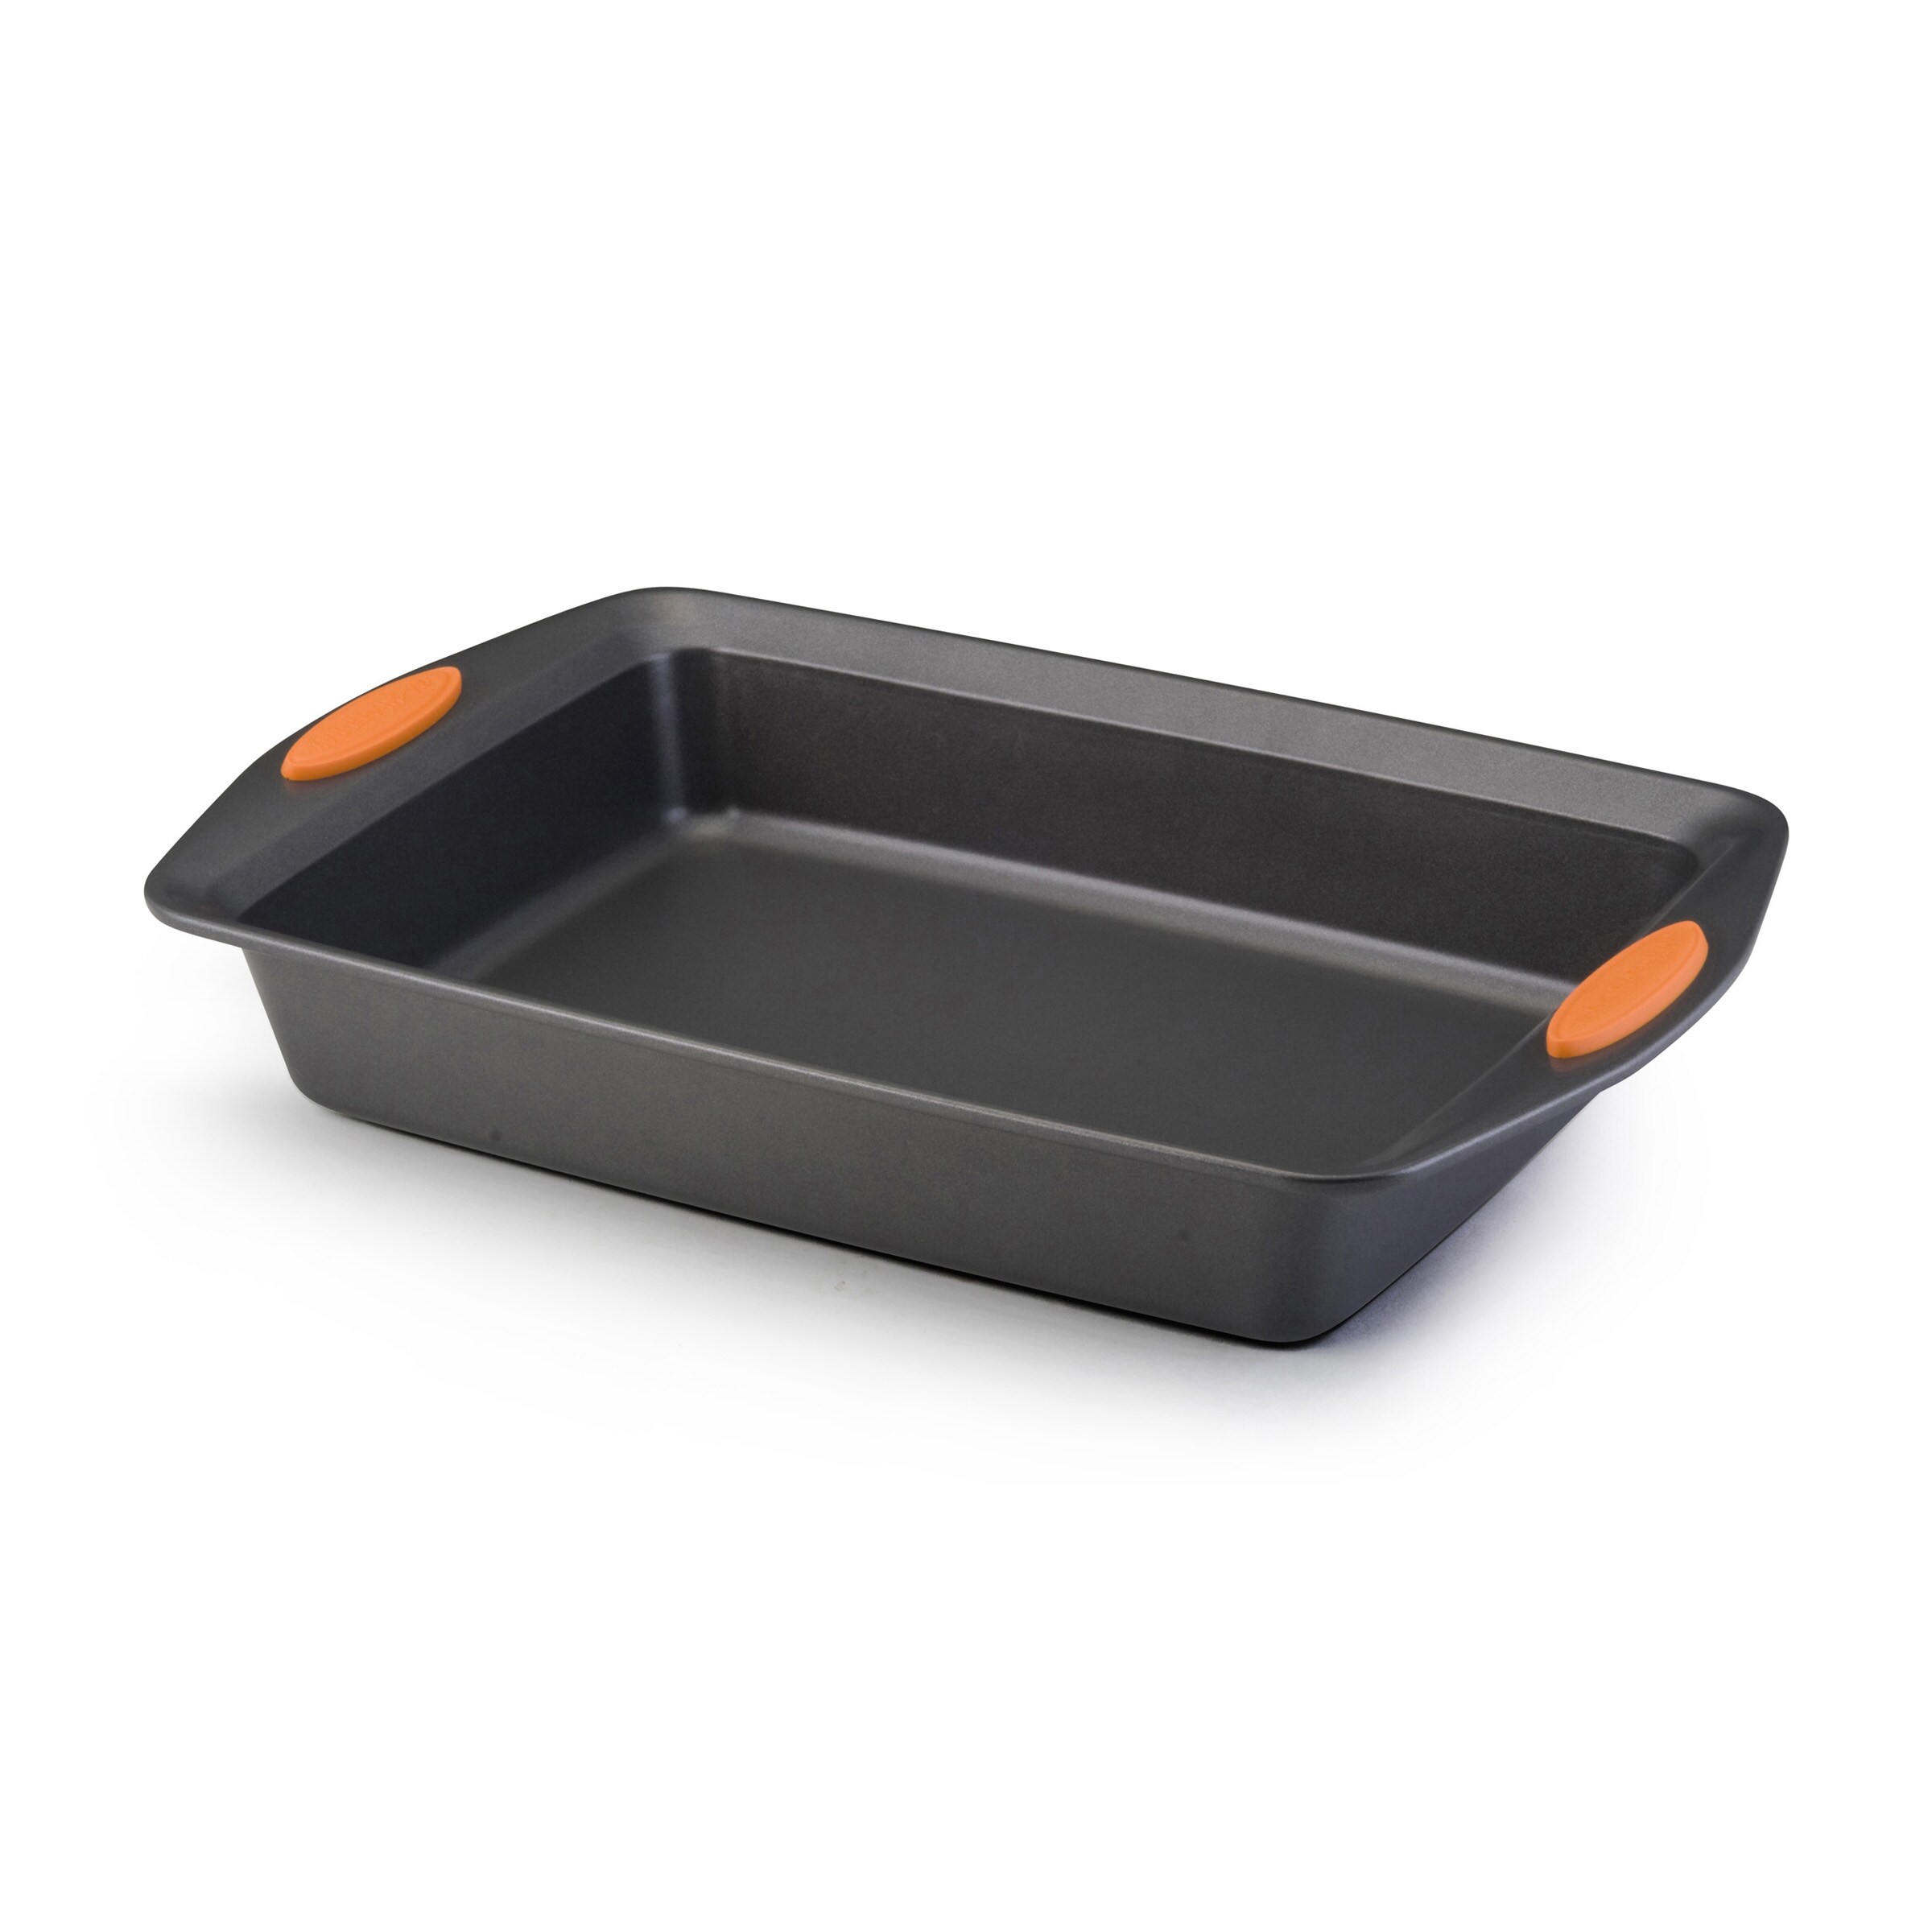 https://ak1.ostkcdn.com/images/products/7468668/7468668/Rachael-Ray-Bakeware-Oven-Lovin-Rectangle-9-Inch-by-13-Inch-Cake-Pan-L14916468.jpg